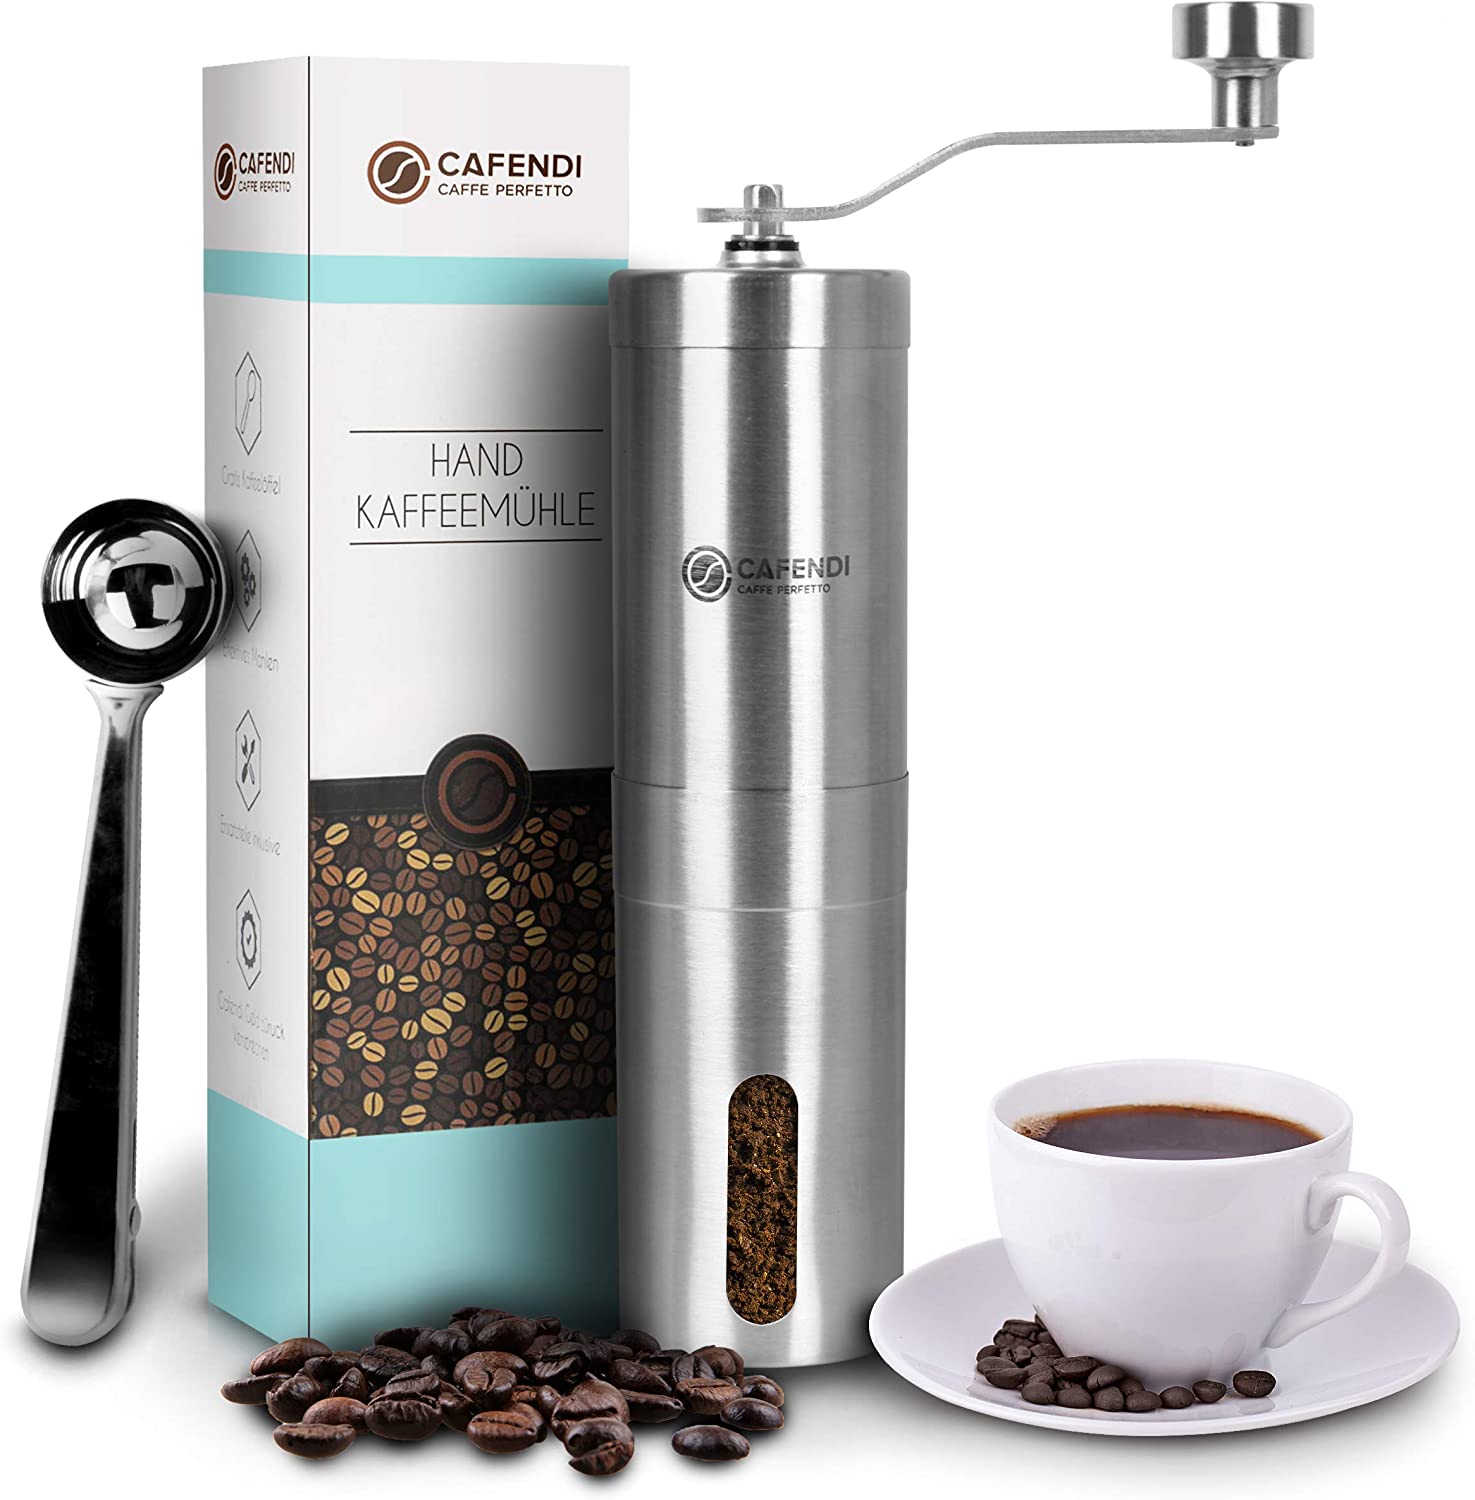 Cafendi Manual Coffee Grinder, Stainless Steel Hand Coffee Grinder, Robust Ceramic Grinder, Espresso Grinder for Kitchen, Camping and Outdoor, with e-book for Perfect Coffee Enjoyment